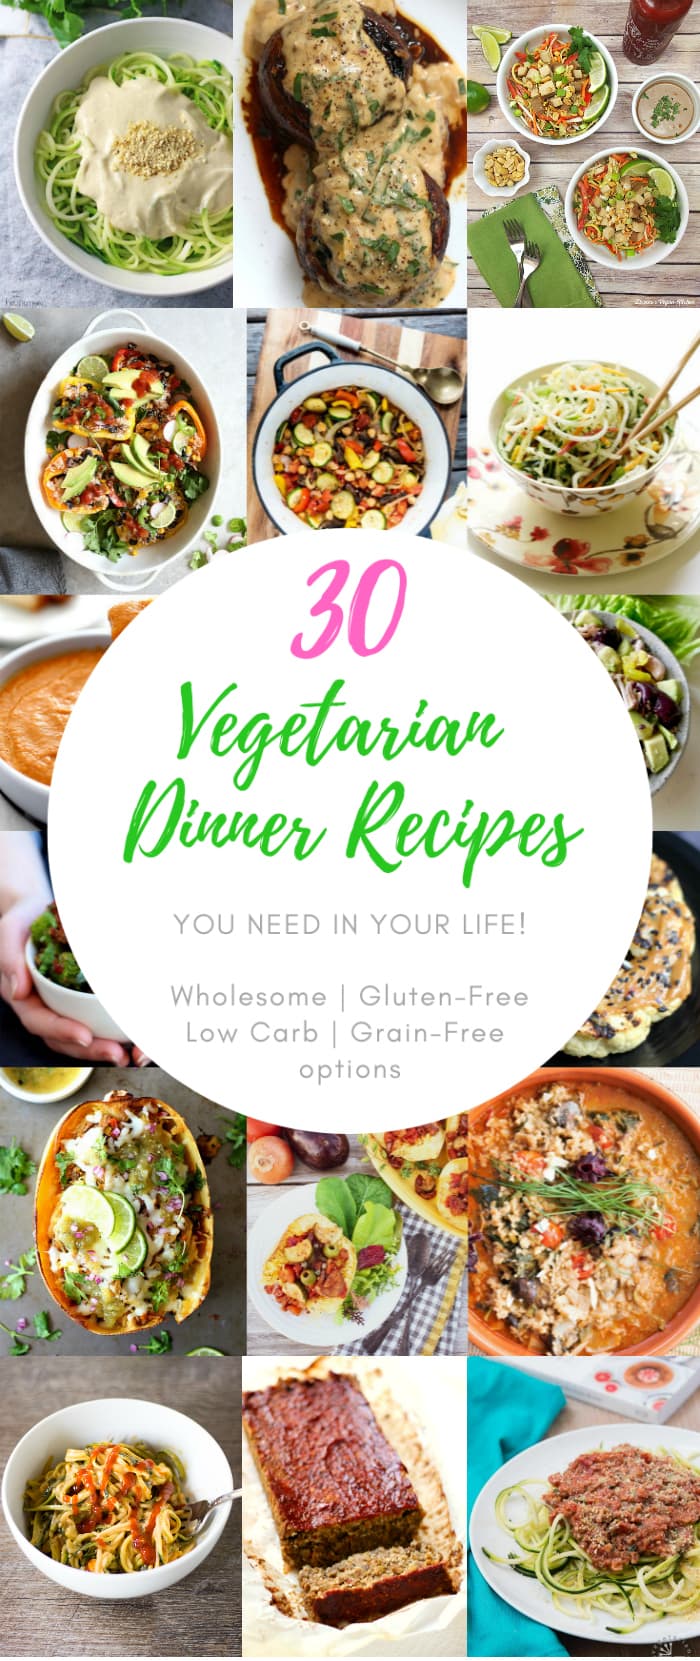 30 Vegetarian Dinners You Need In Your Life (Low Carb Options)